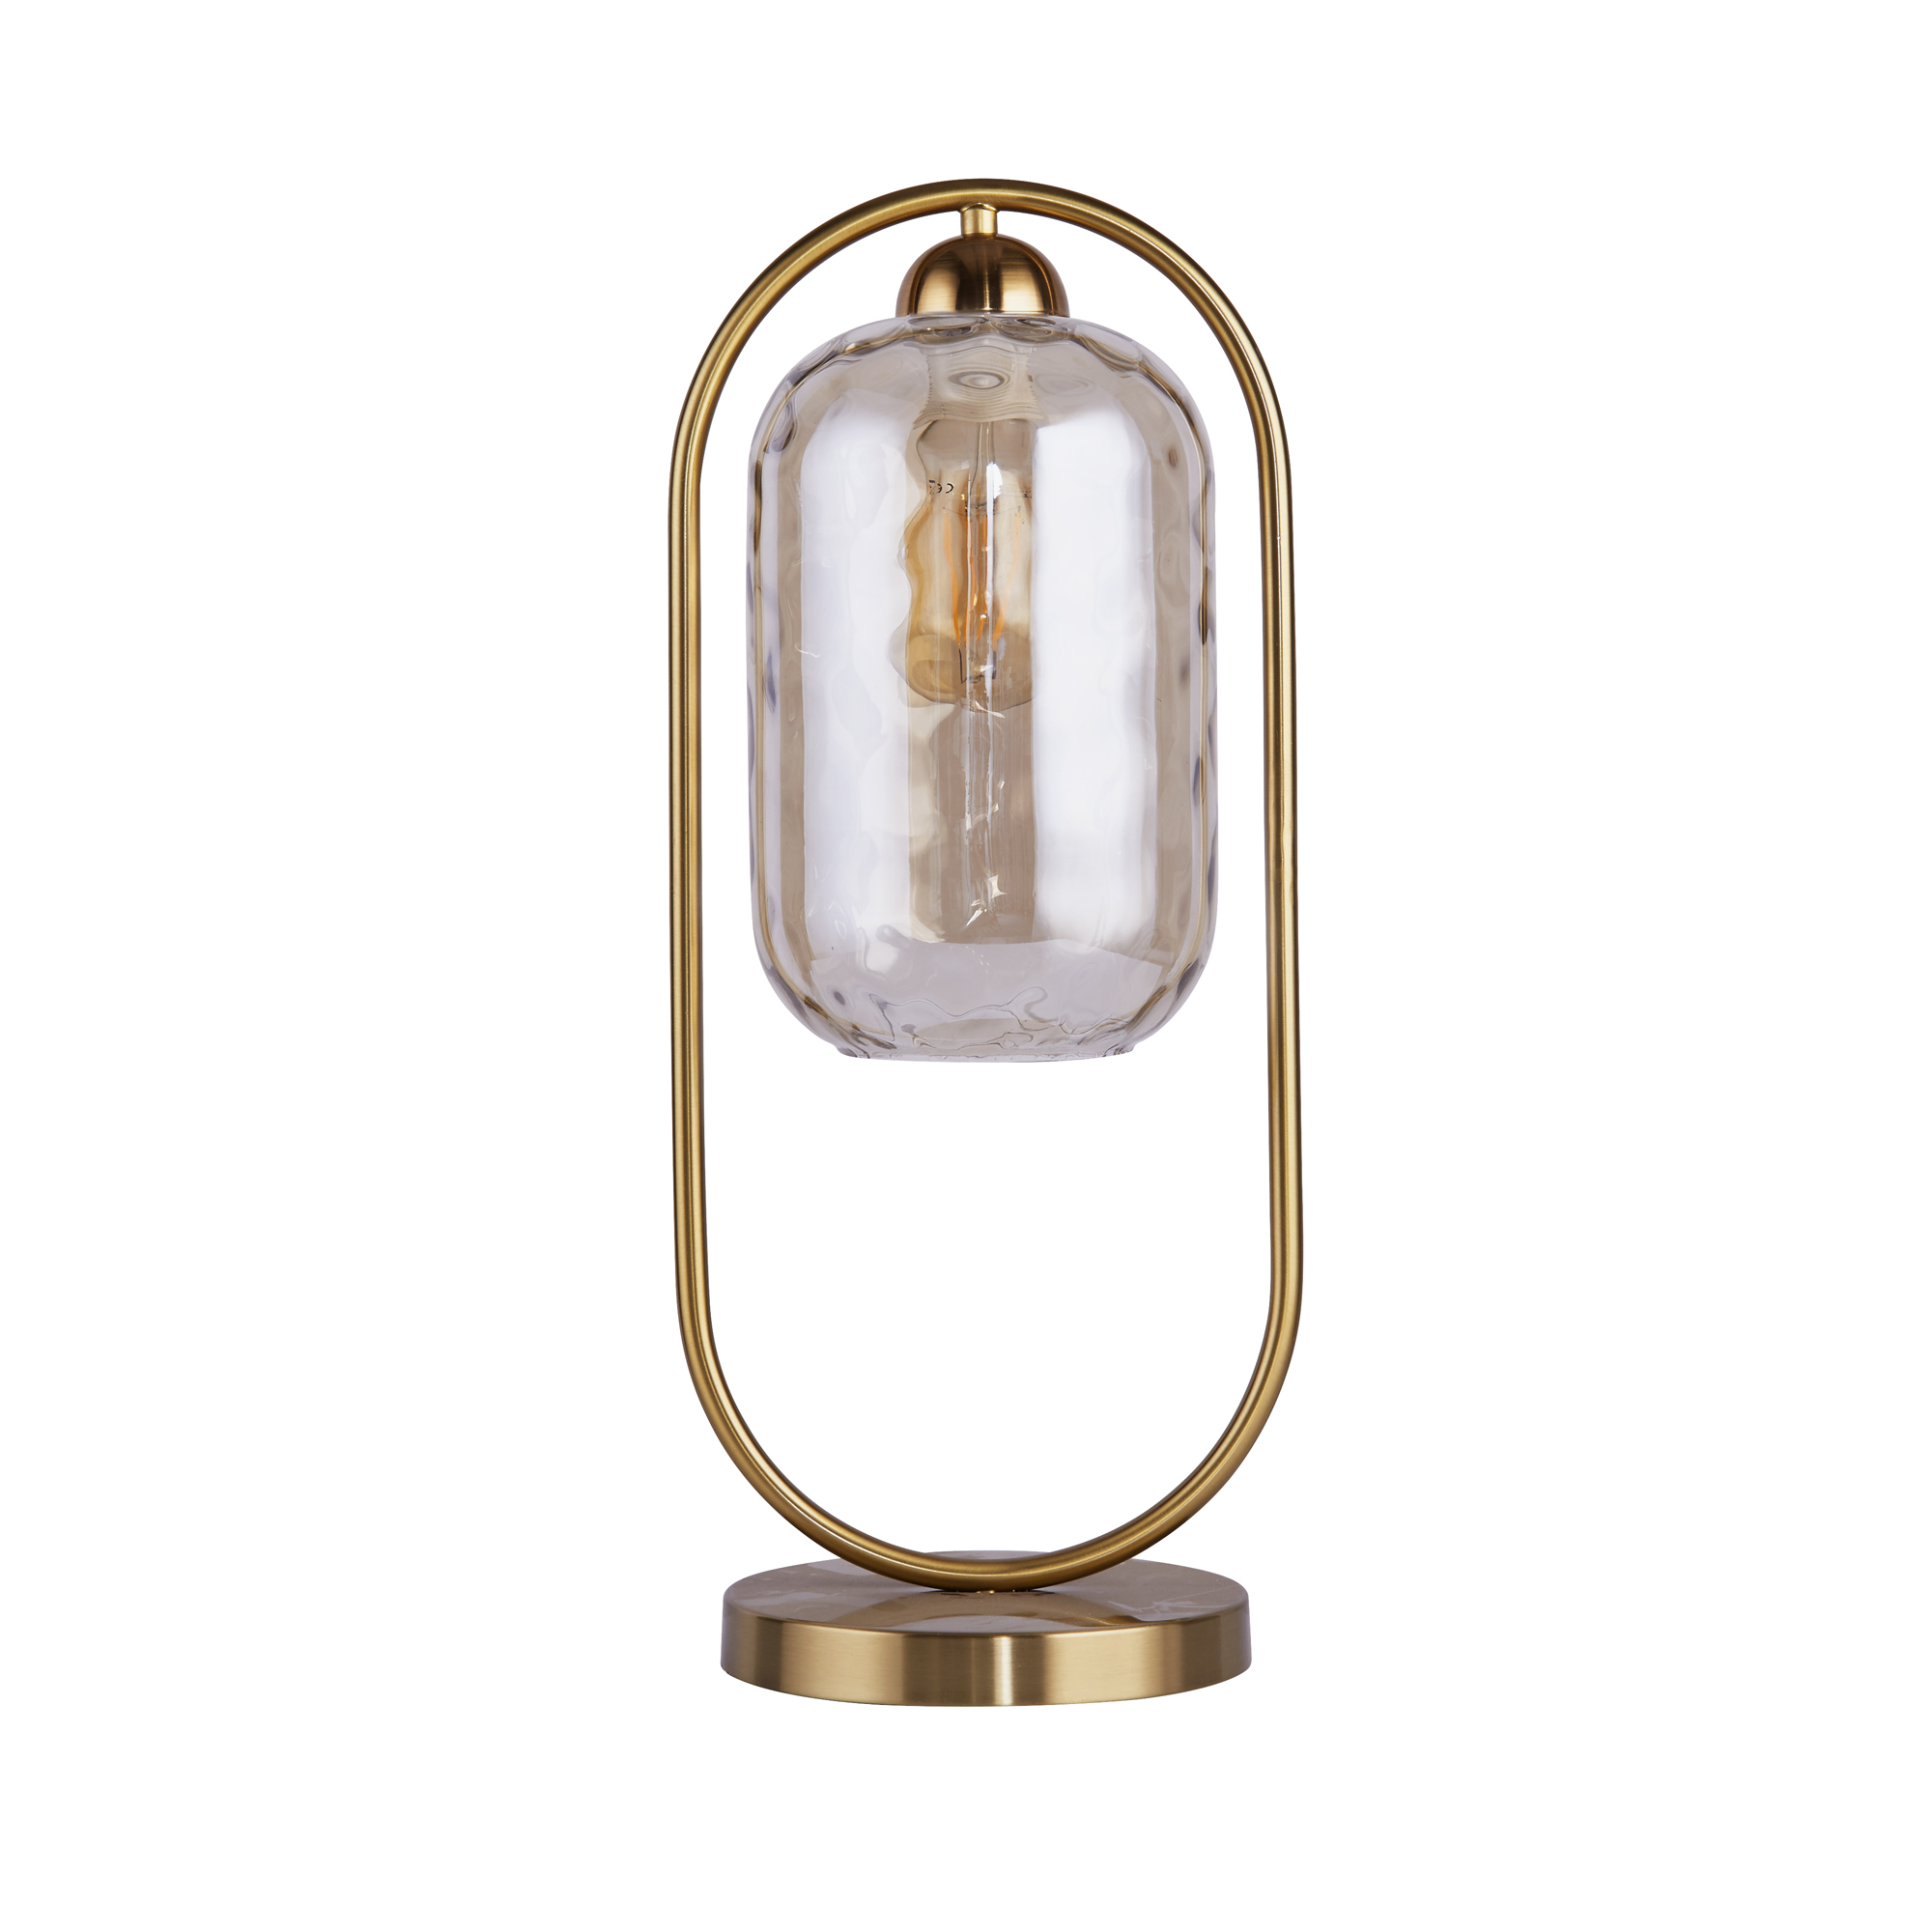 Lux & Belle Table Lamp - Satin Brass Metal & Amber Glass